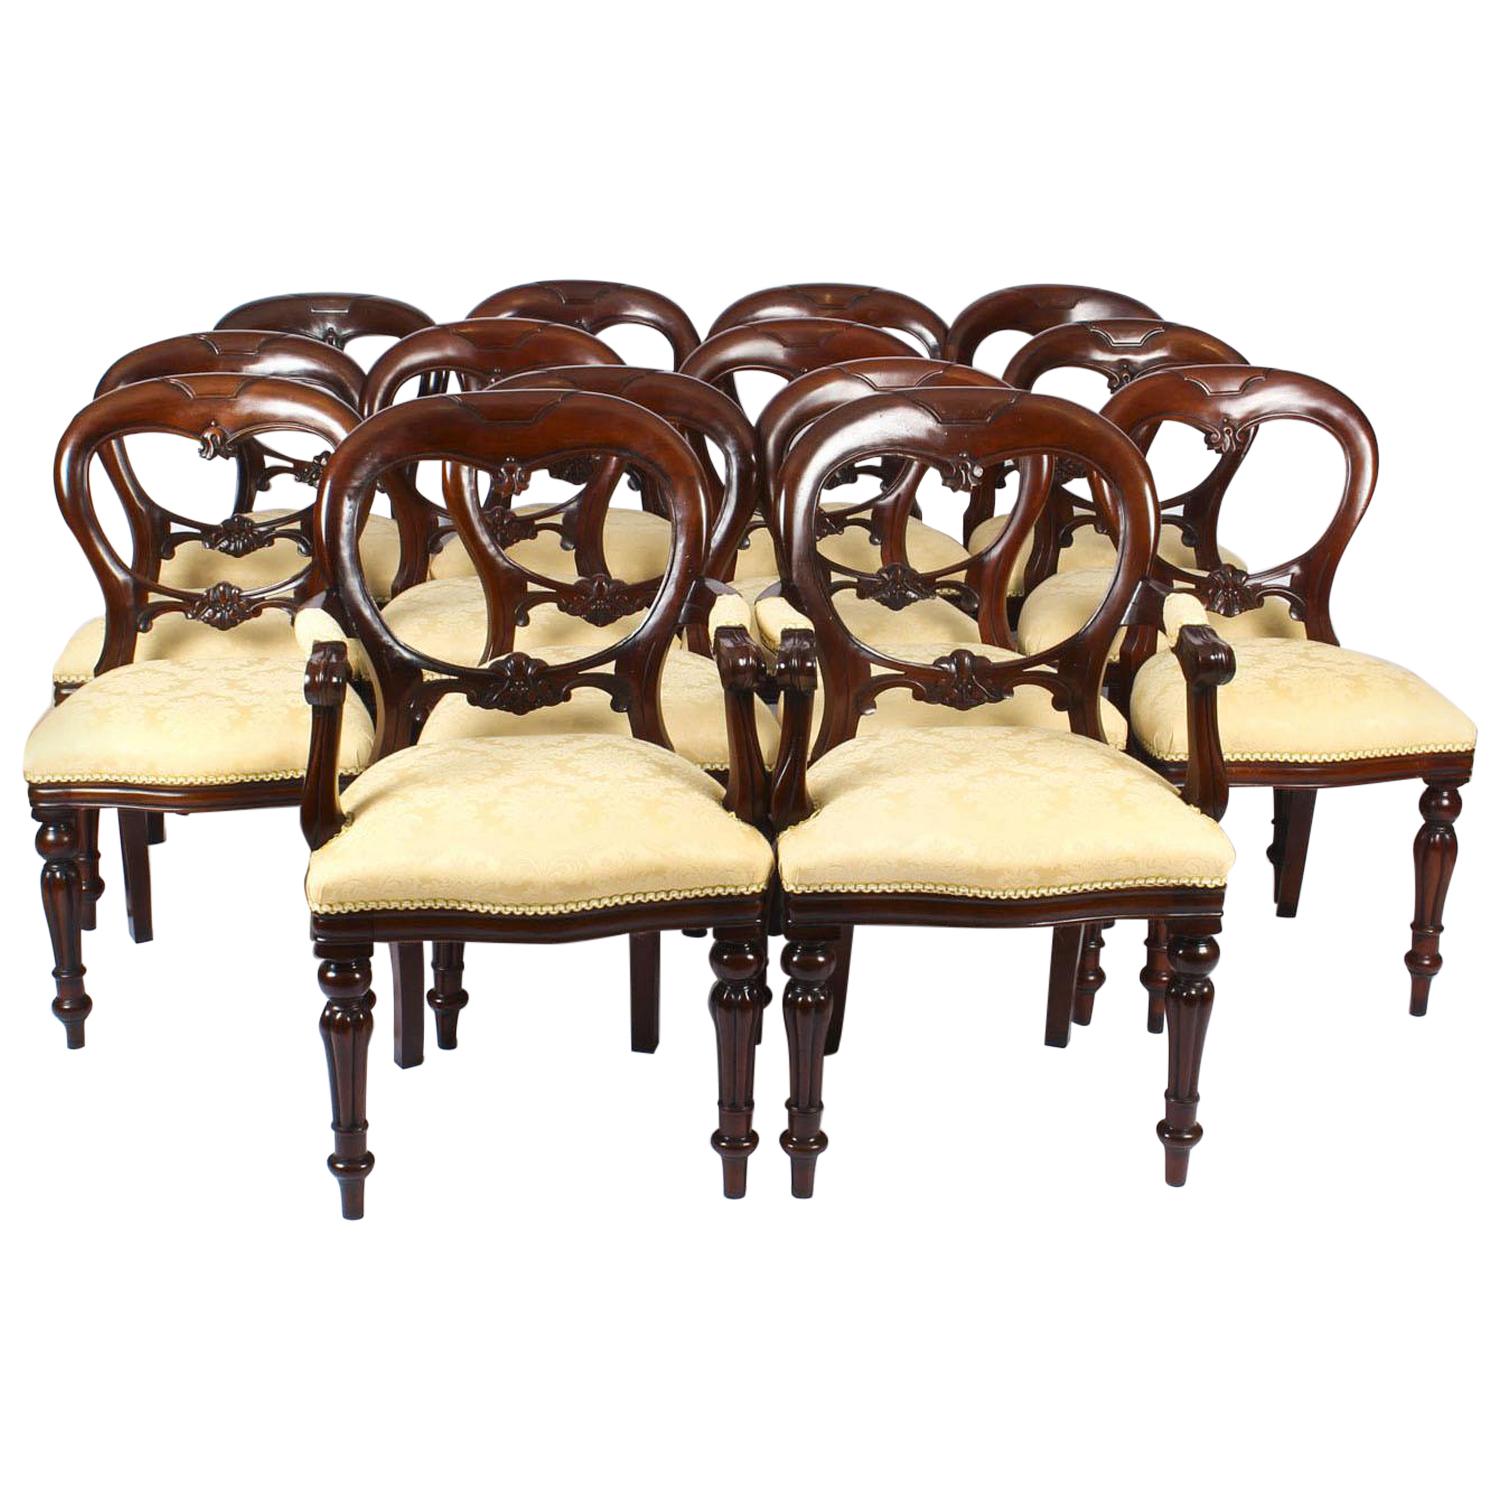 Vintage Set of 12 Victorian Revival Balloon Back Dining Chairs, 20th Century